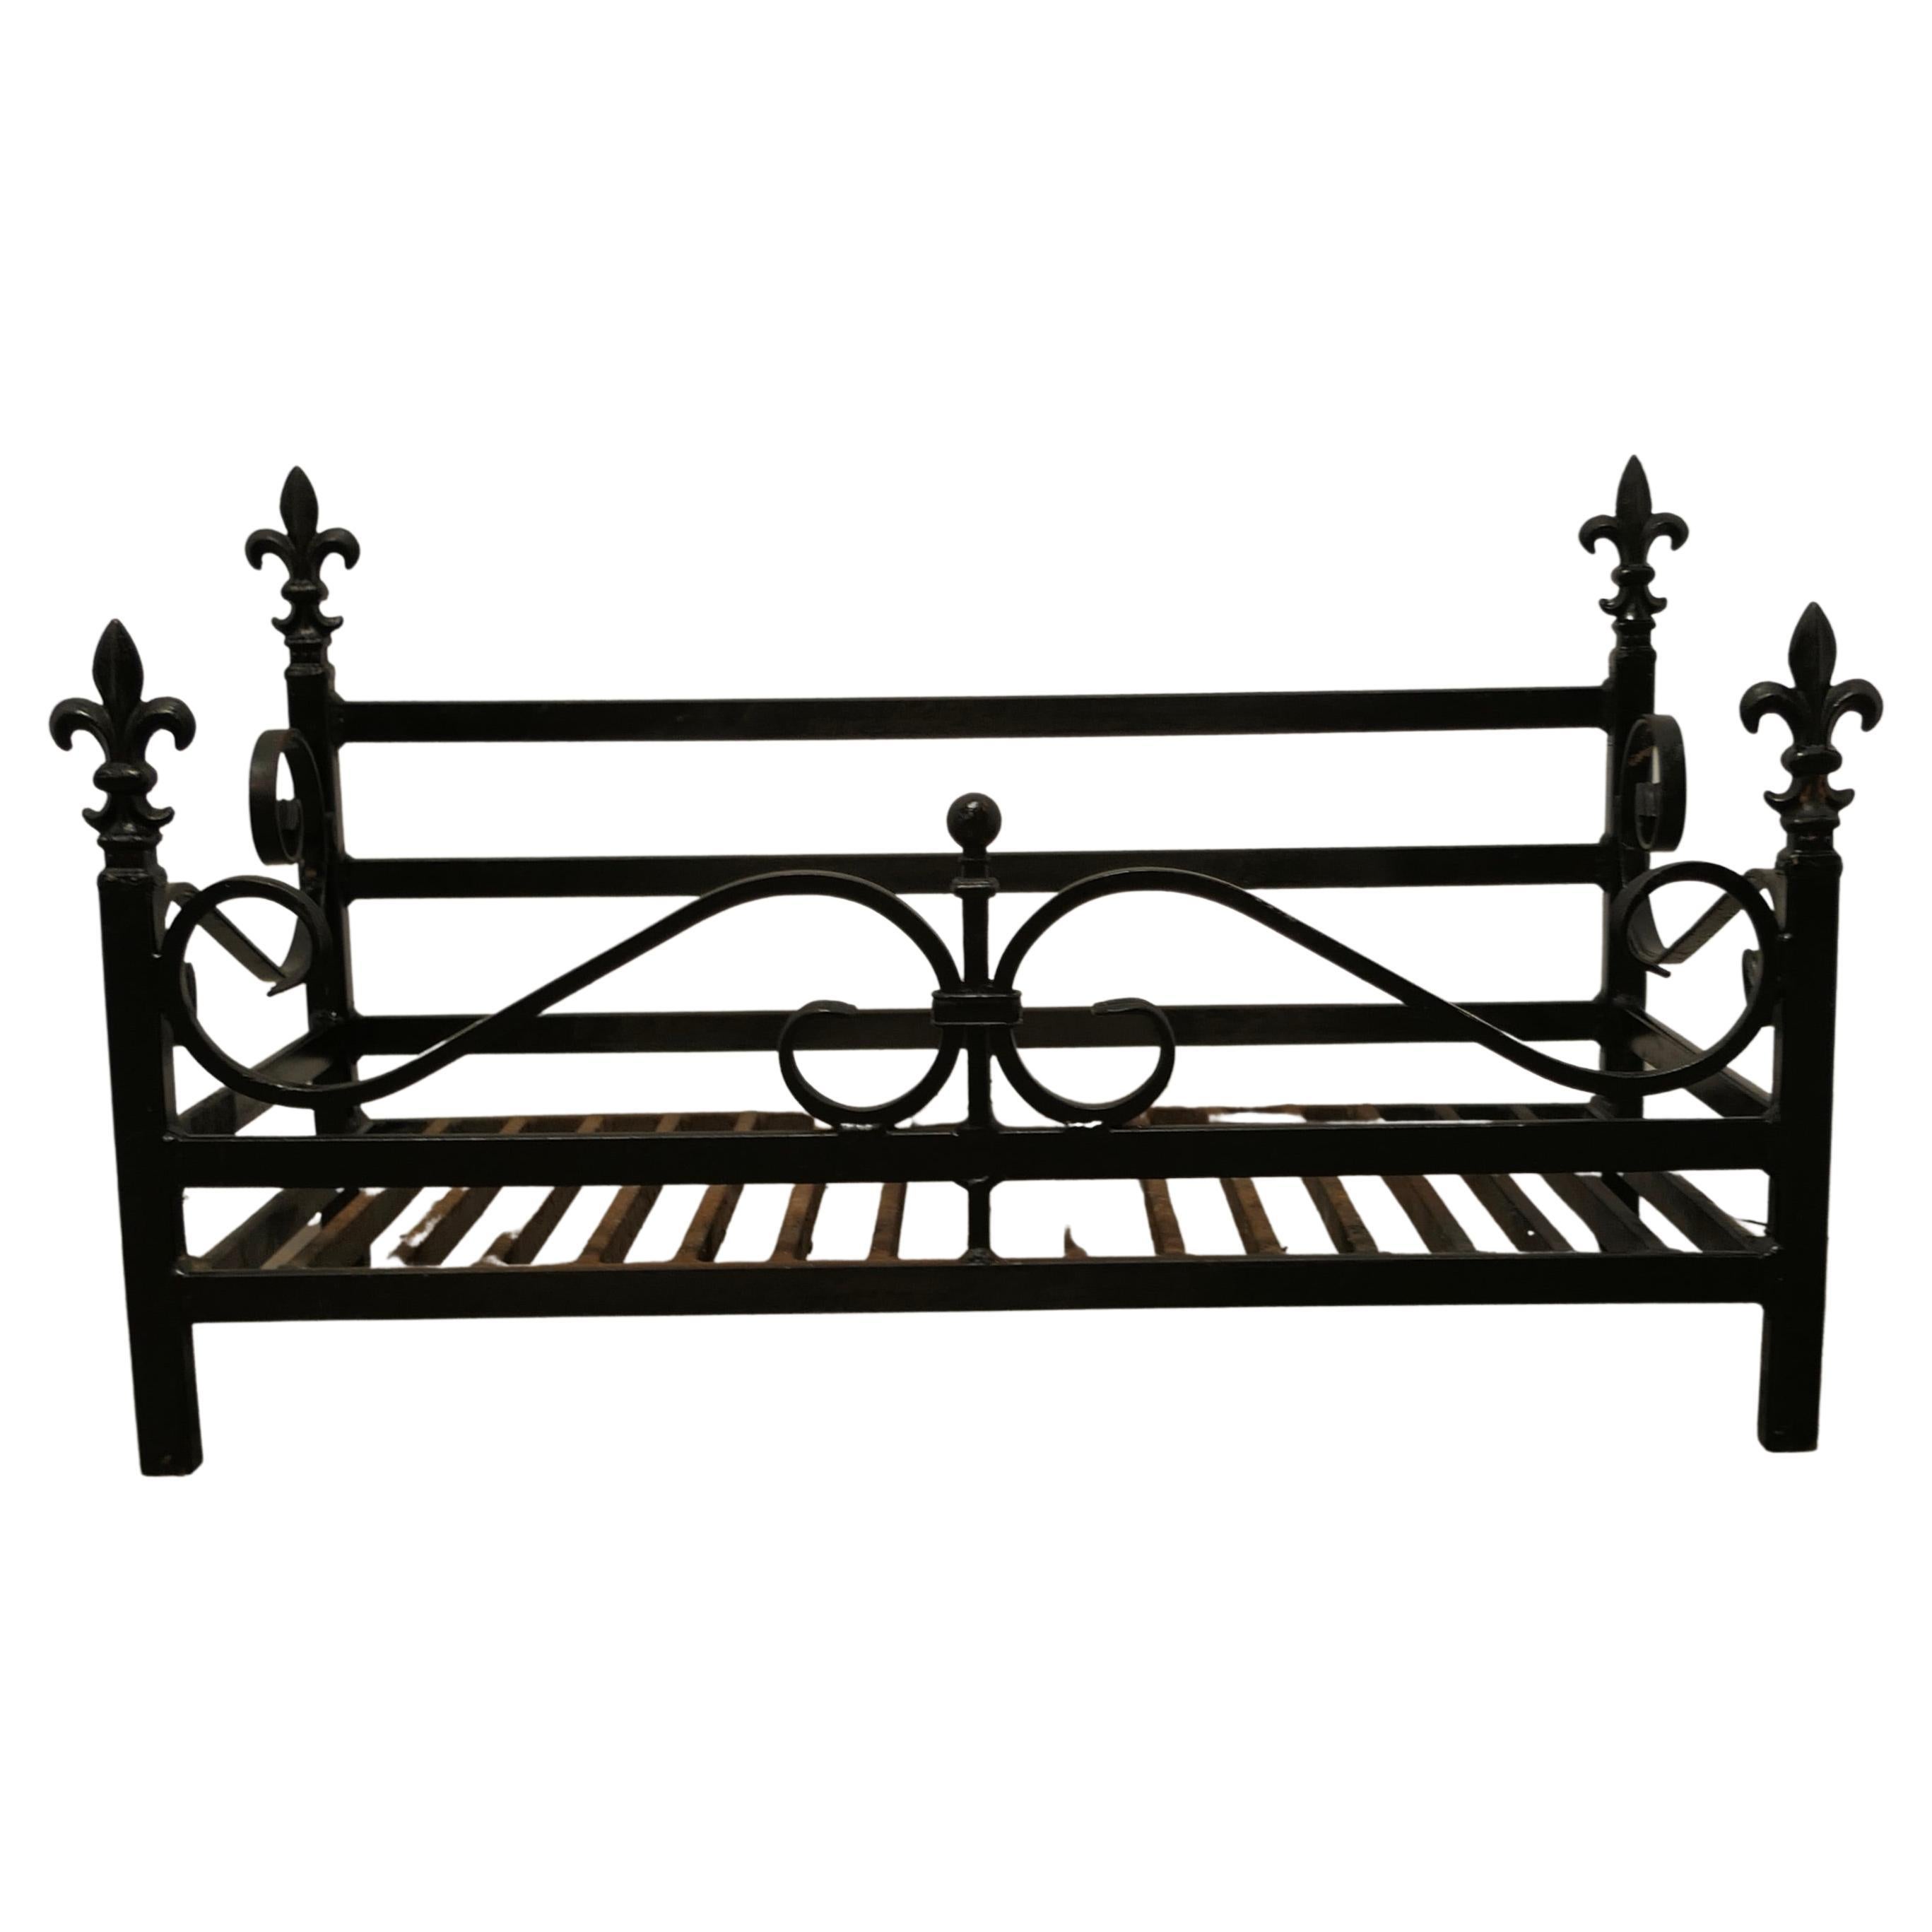 Large Inglenook Free Standing Fire Basket, Iron Fire Grate